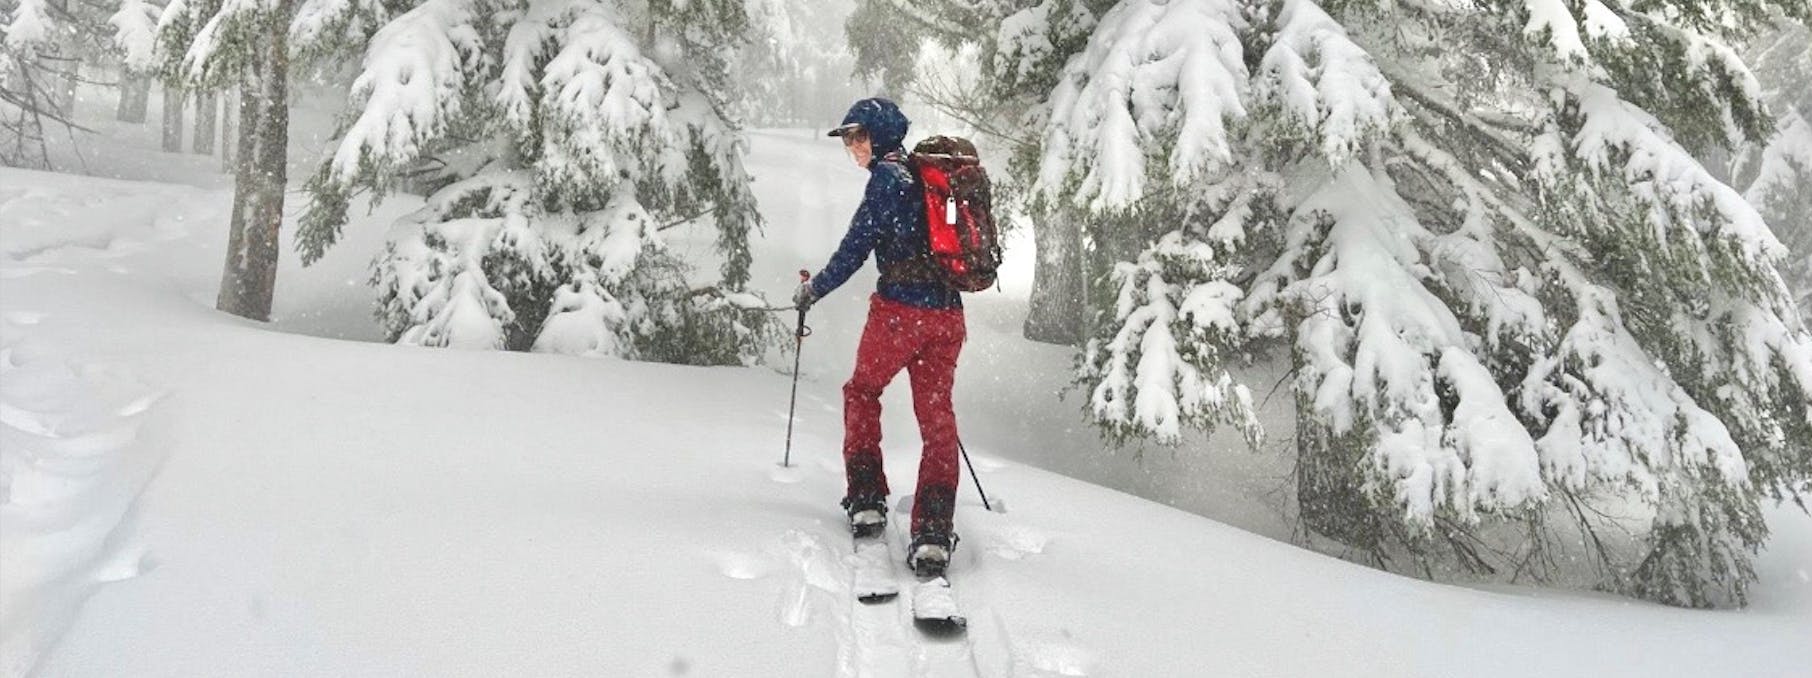 A woman splitboarding on a snowy day. She is walking uphill and smiling at the camera. 